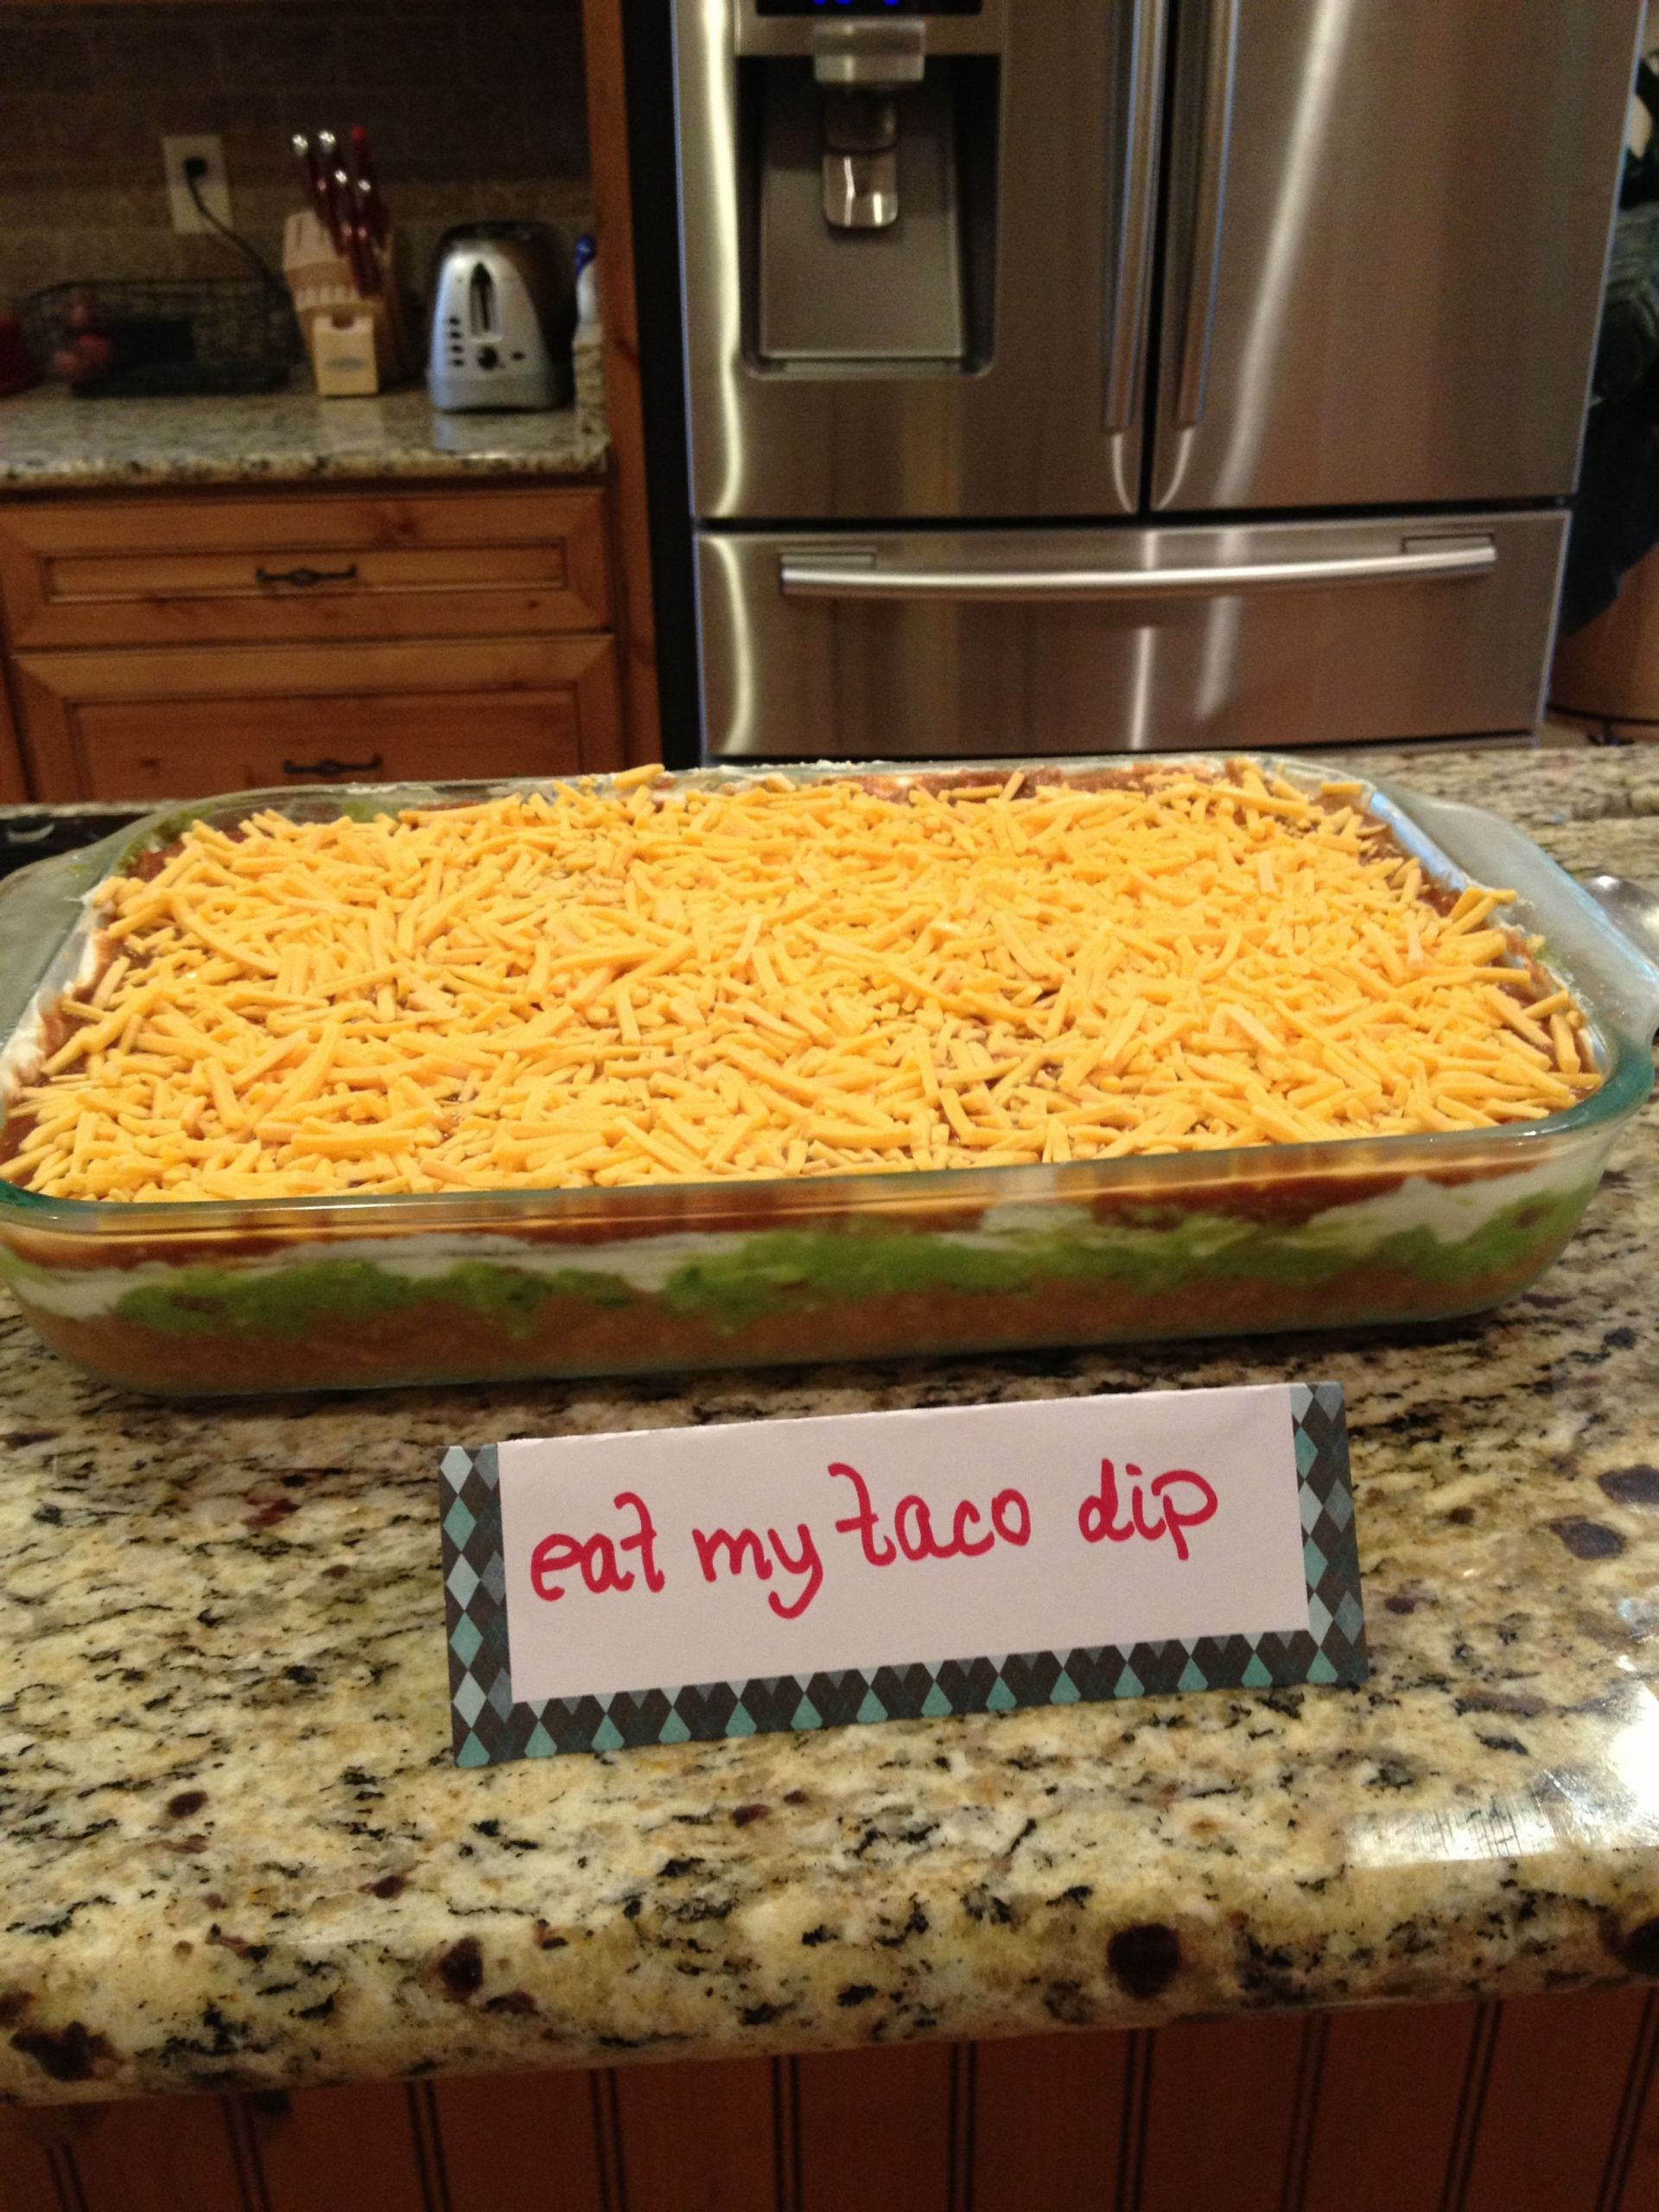 Bachelorette Party Snacks Ideas
 Passion party themed food Eat my taco dip